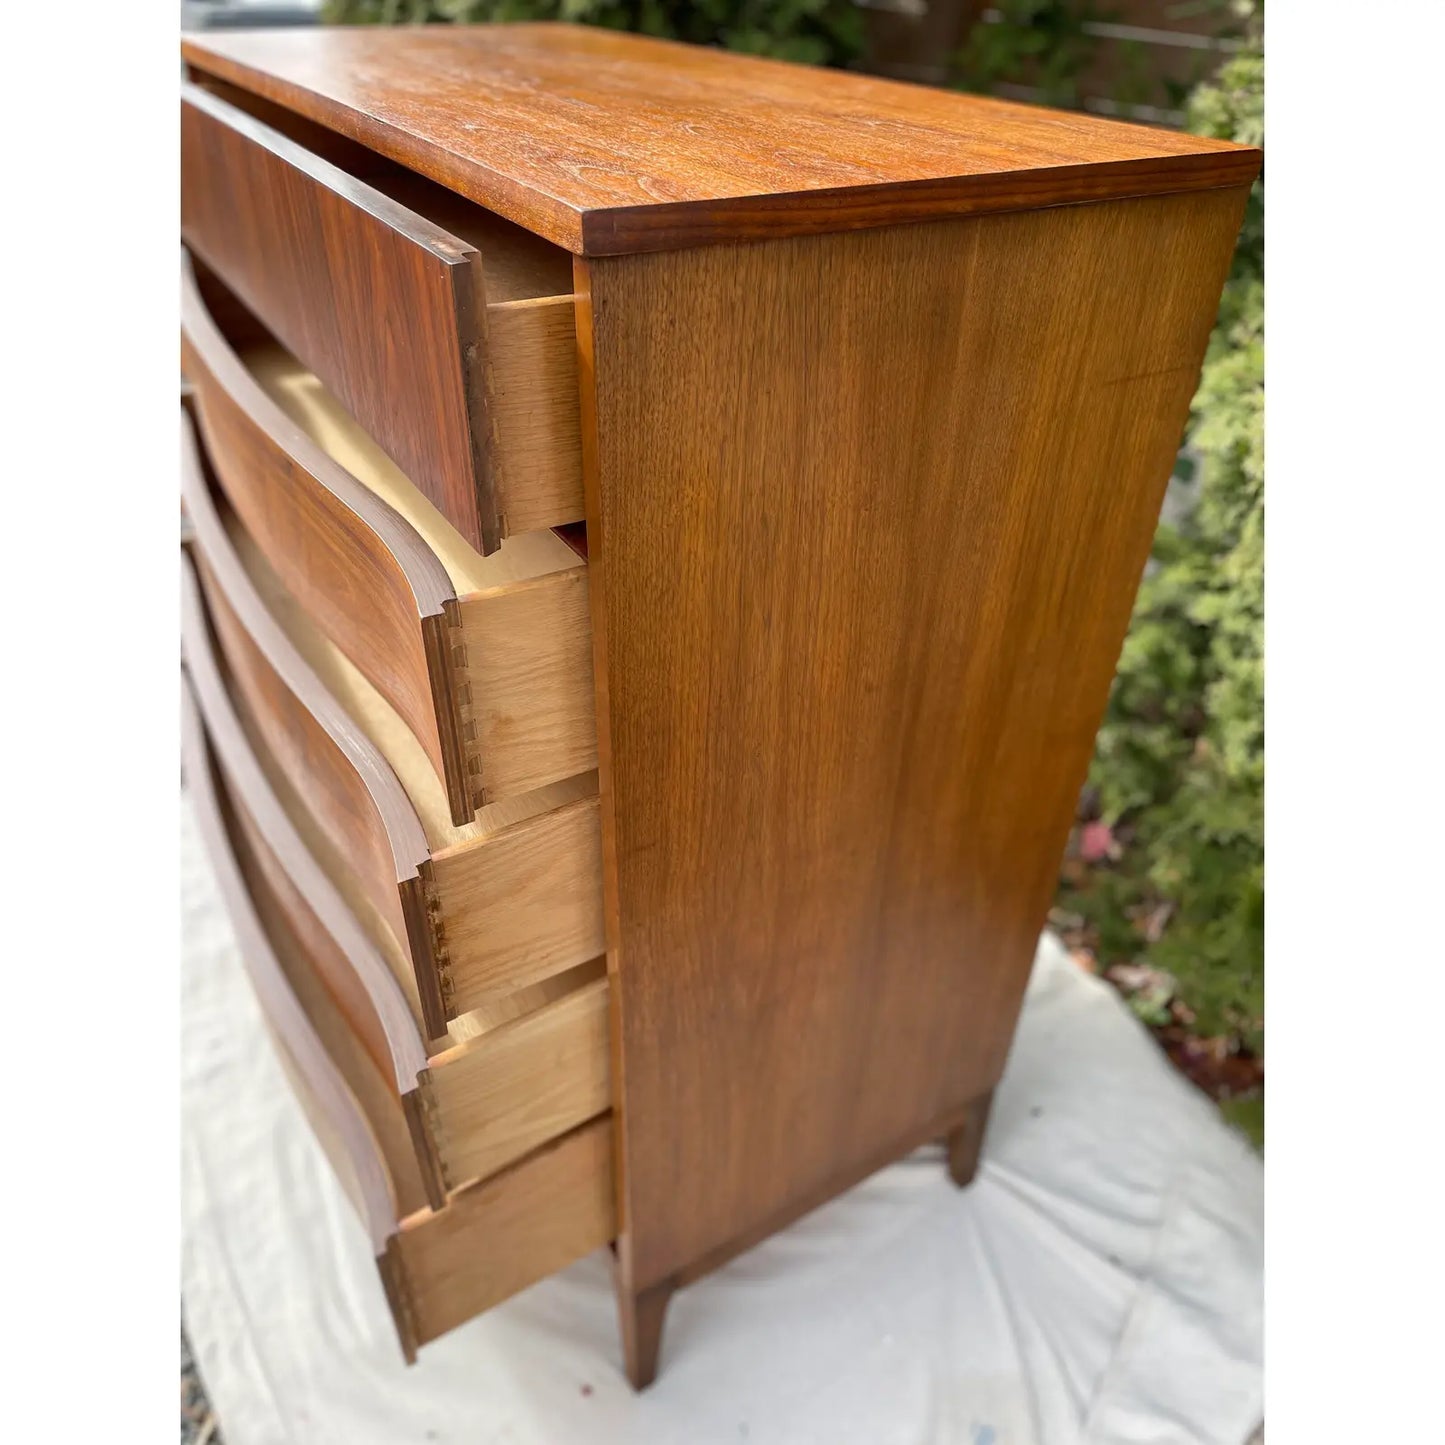 1960s Mid-Century Modern Walnut Highboy Dresser With Curved Front Drawers